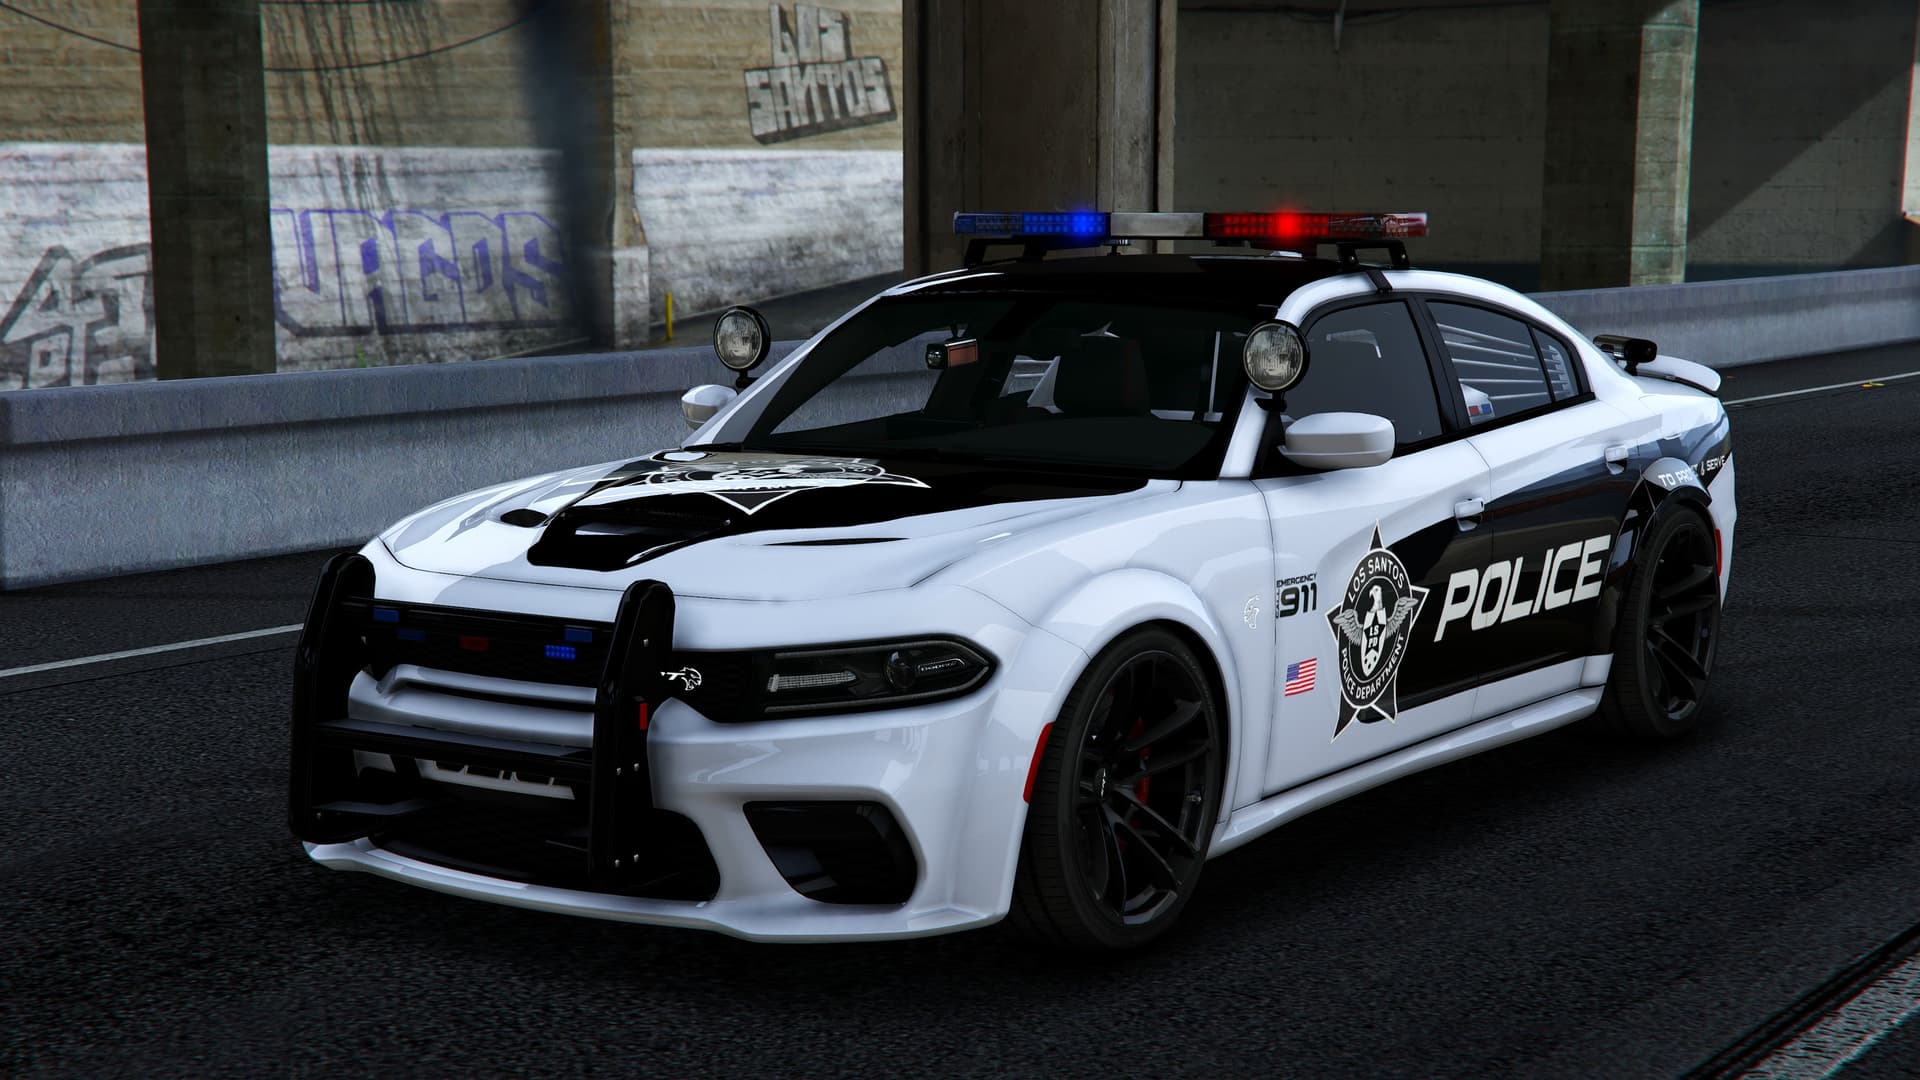 Charger police unit - Releases - Cfx.re Community